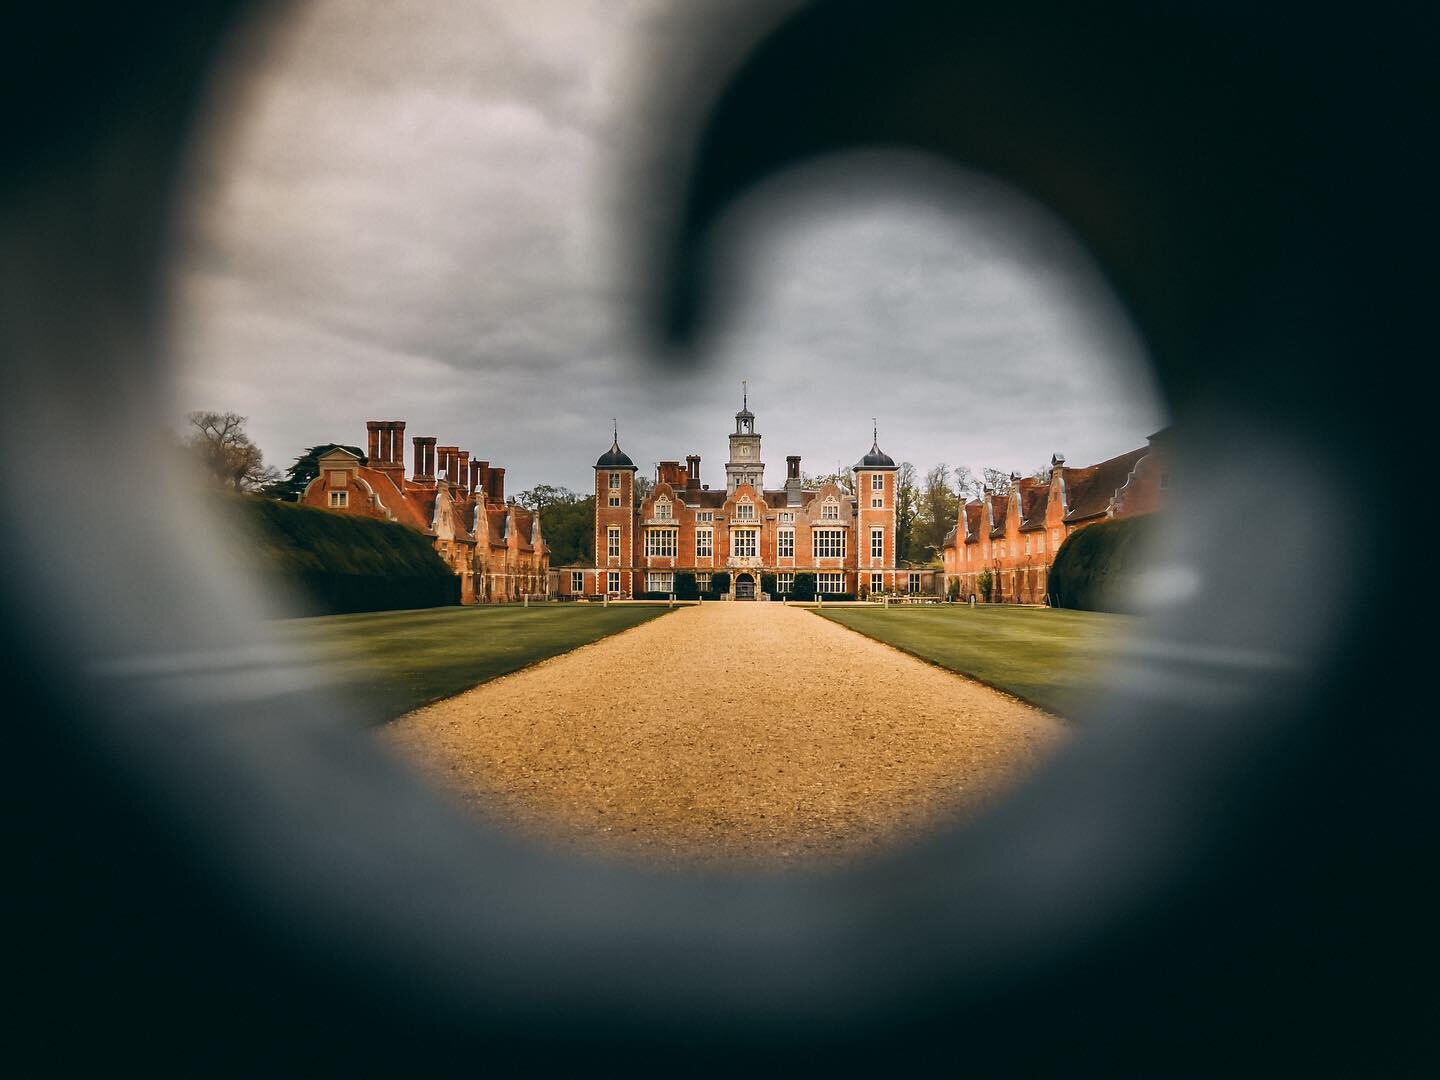 East Anglia offers so much variety. Blickling Estate NT in Norfolk is a gem. You could happily while away a day exploring the parkland, garden and house. Close to The Broads and North Norfolk Coast. 

📷 @jakemermagen 

#nationaltrust #blicklingestat